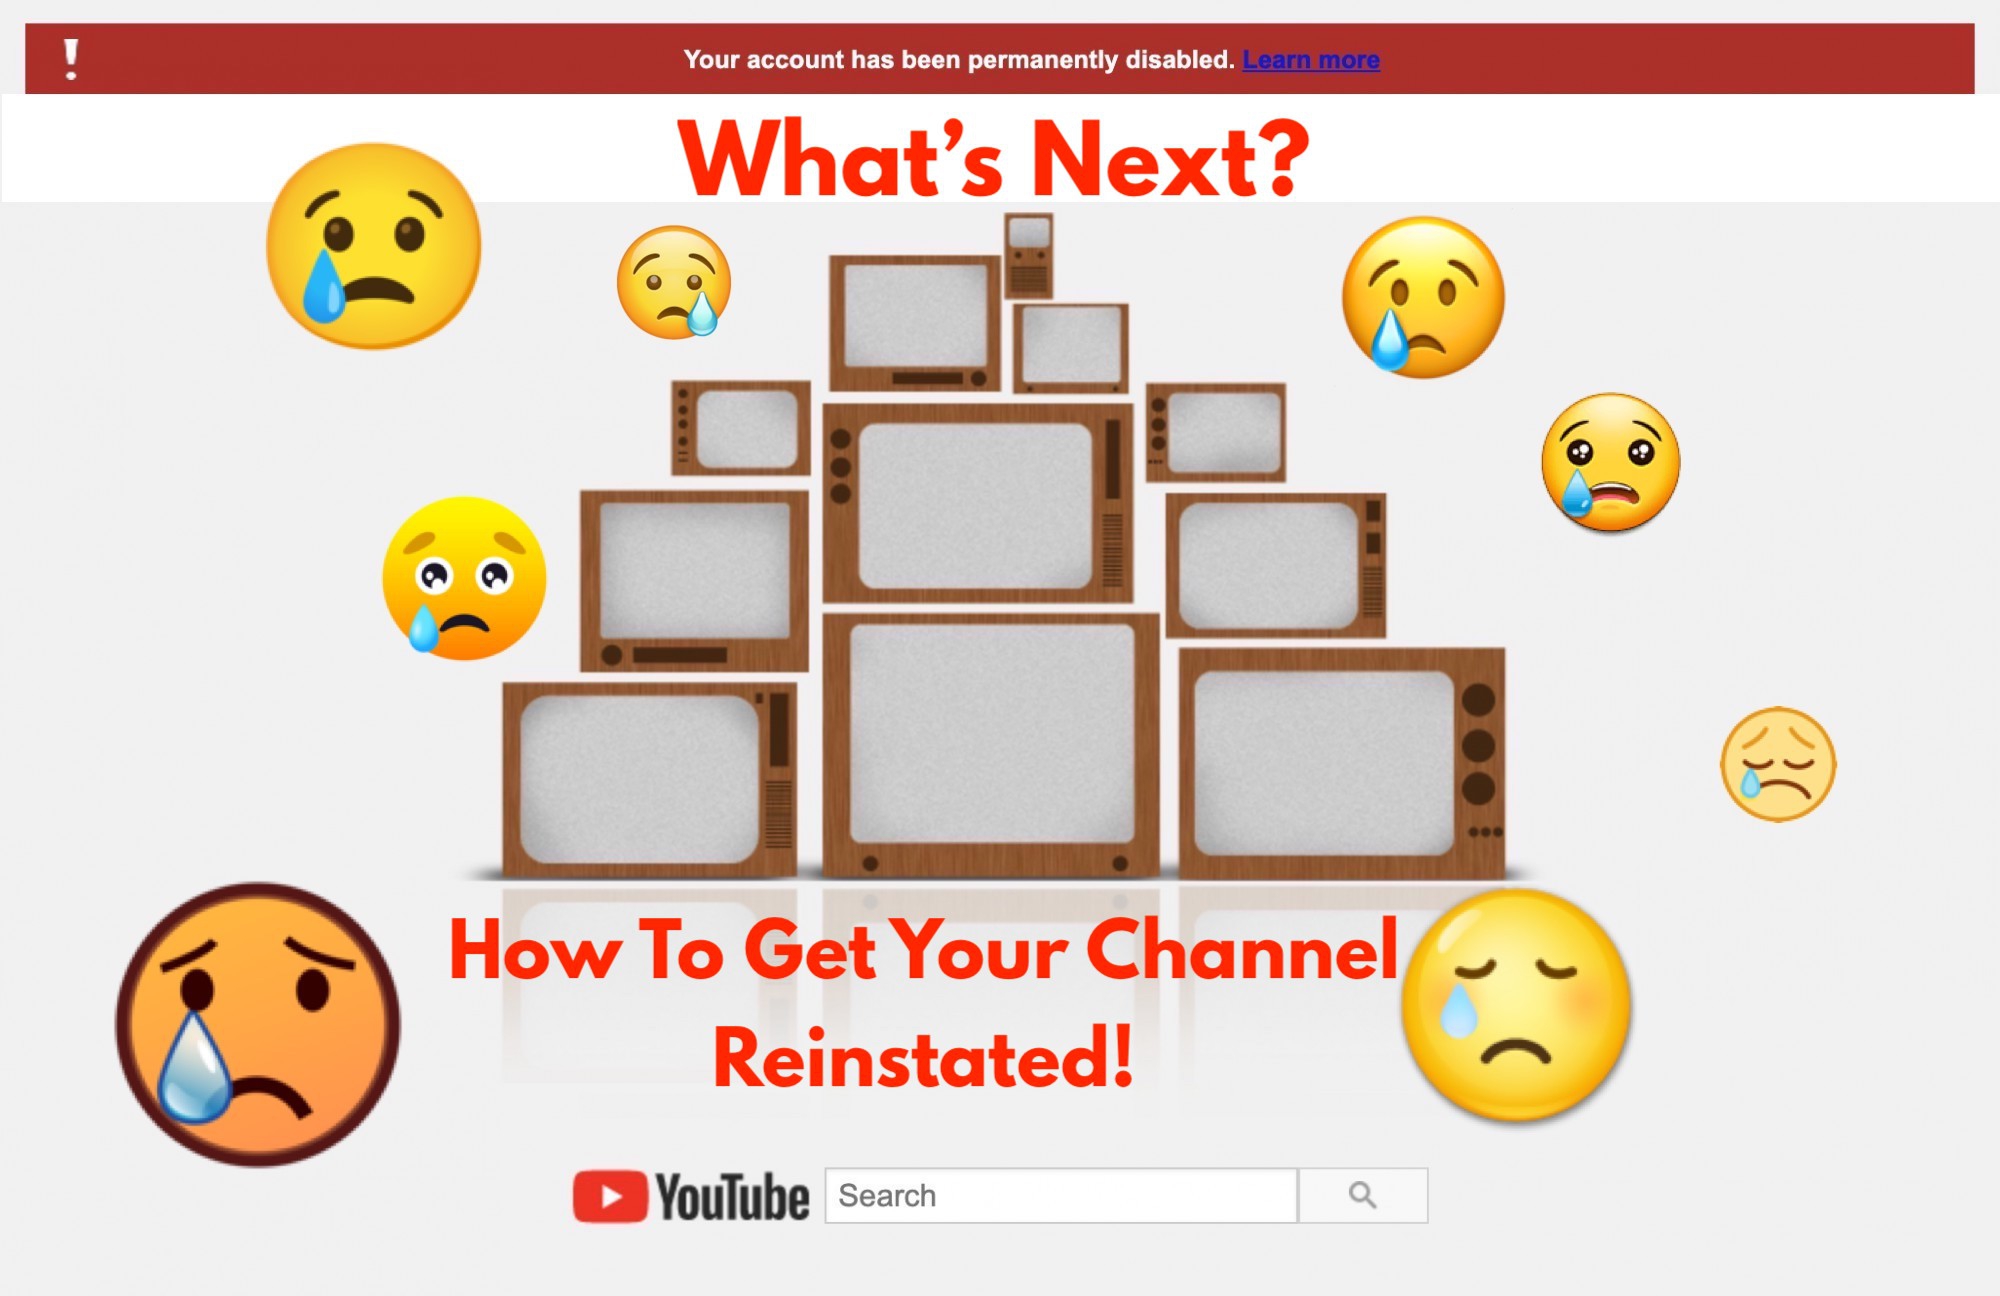 Suddenly – “We have removed your channel from YouTube.” What’s next?